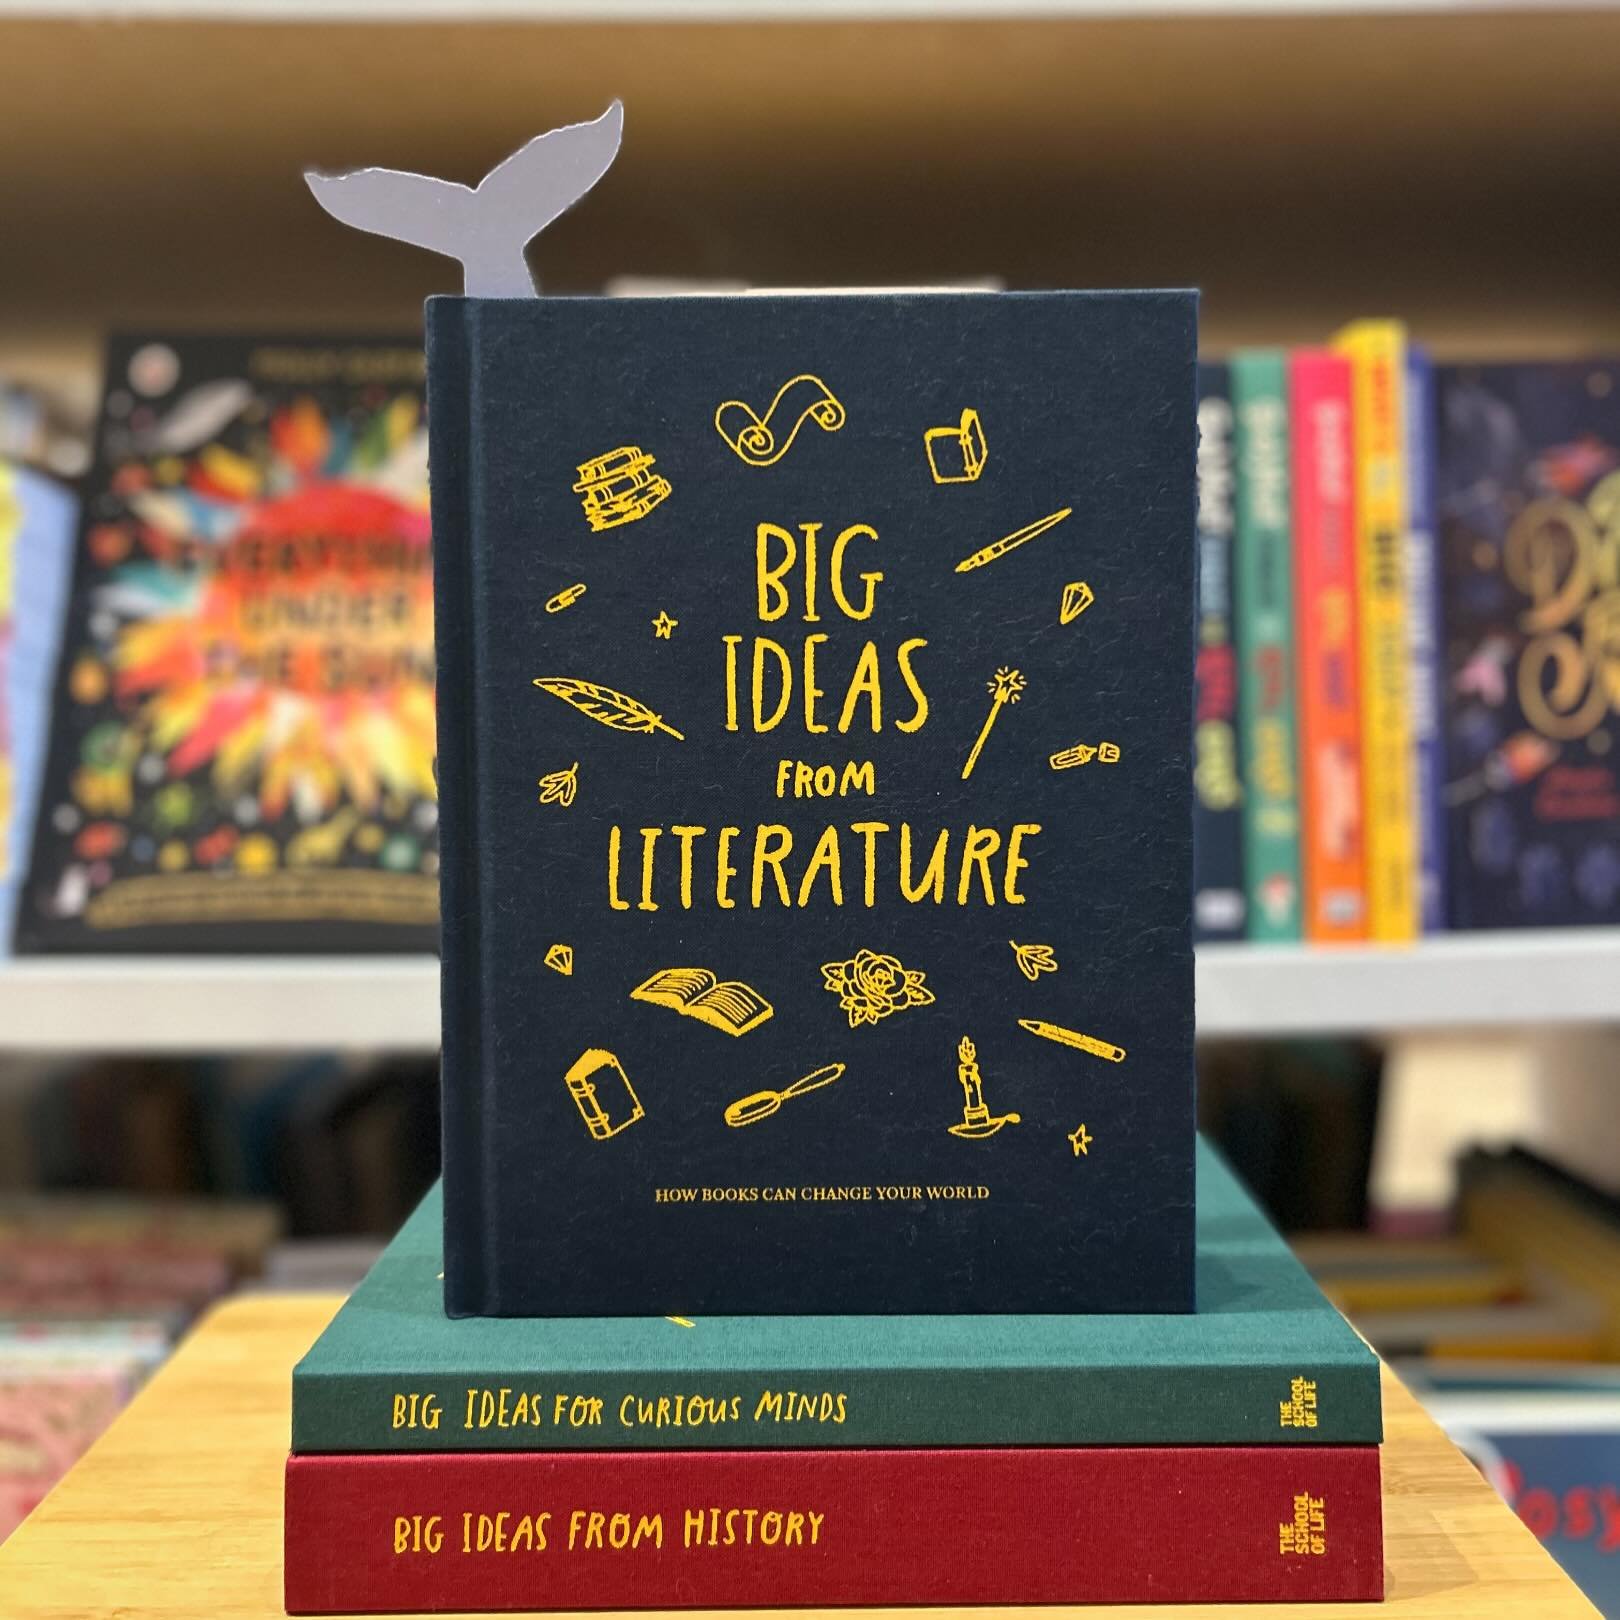 Hey kids! We love this series from The School of Life, introducing big concepts to curious minds including history, philosophy and literature. Designed by a team of psychologists, writers and designers they are beautifully produced, engaging and age-